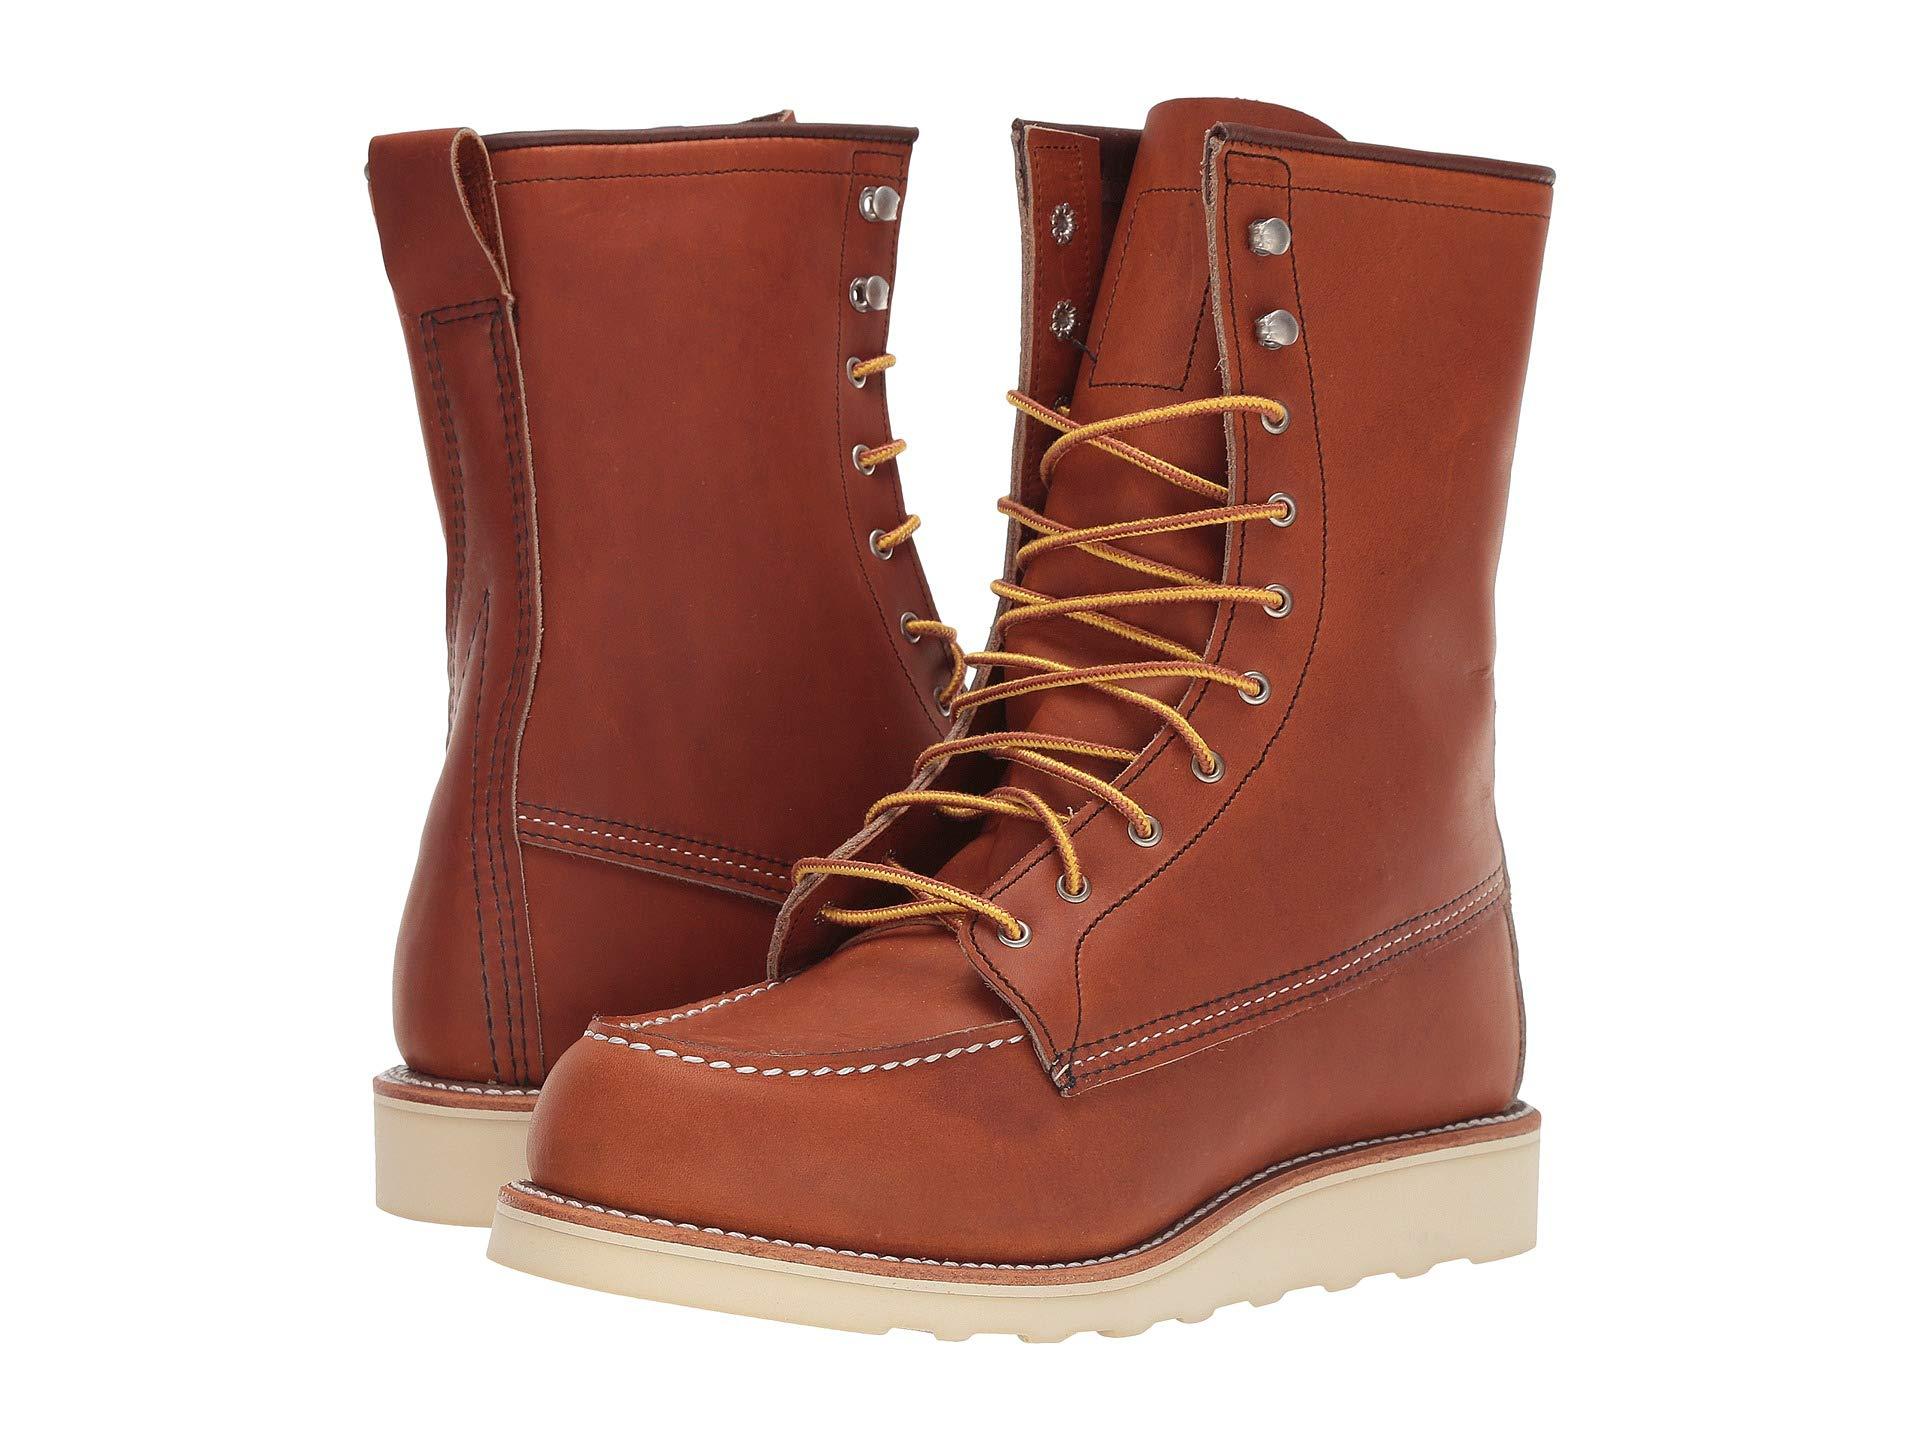 Buy > 8 moc toe boots > in stock